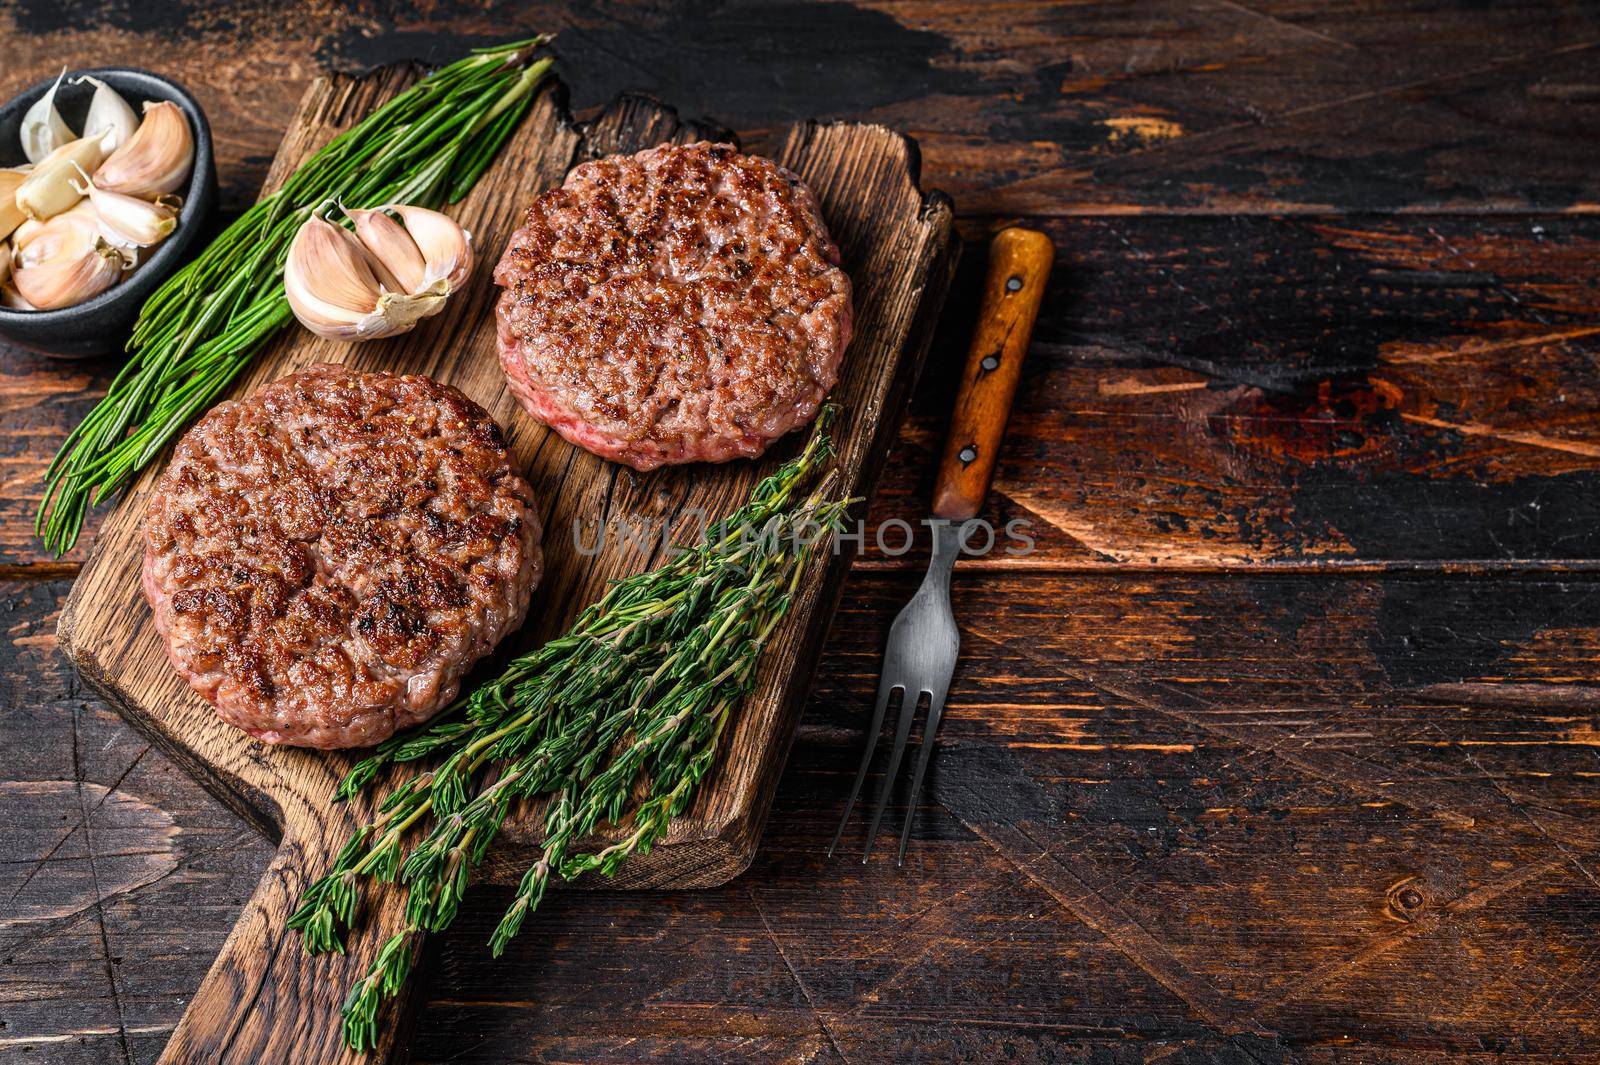 Barbecue steak patties for burger from ground beef meat on a wooden cutting board. Dark wooden background. Top view. Copy space by Composter